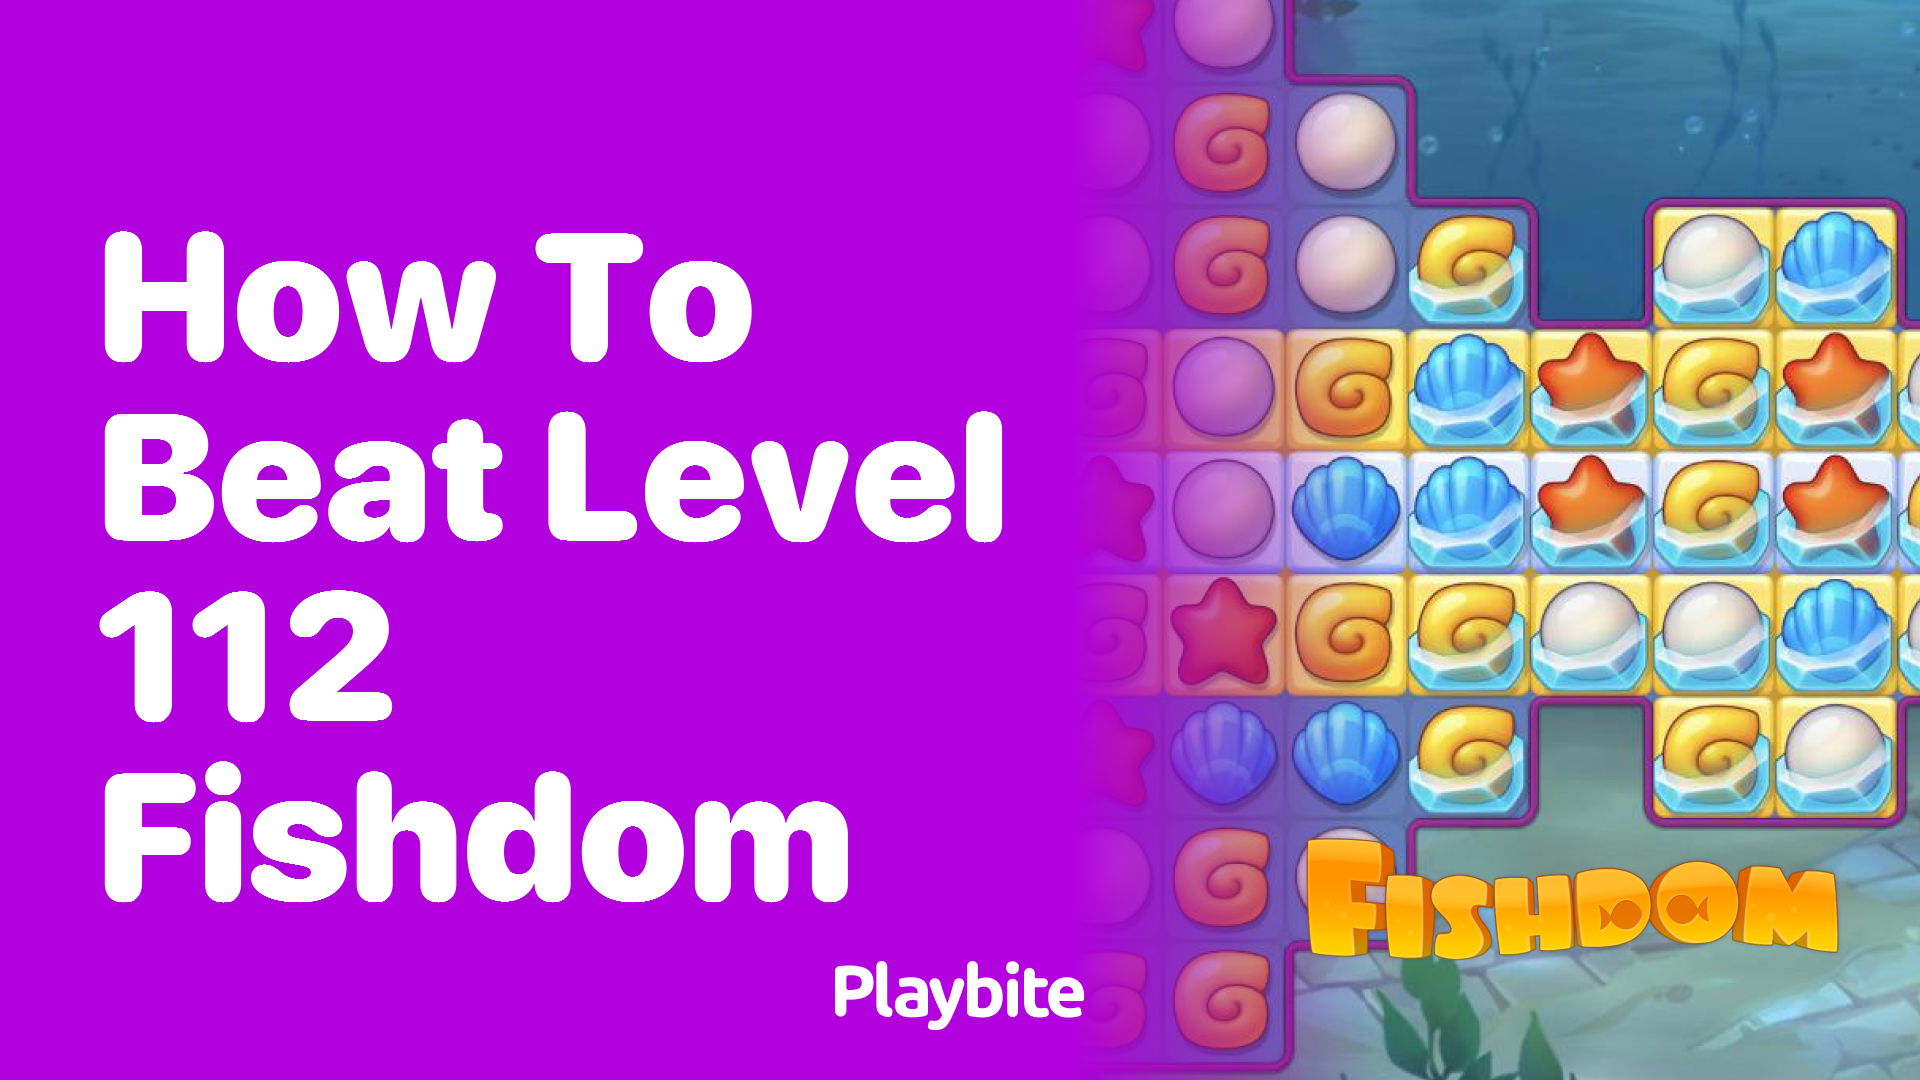 How to Beat Level 112 in Fishdom